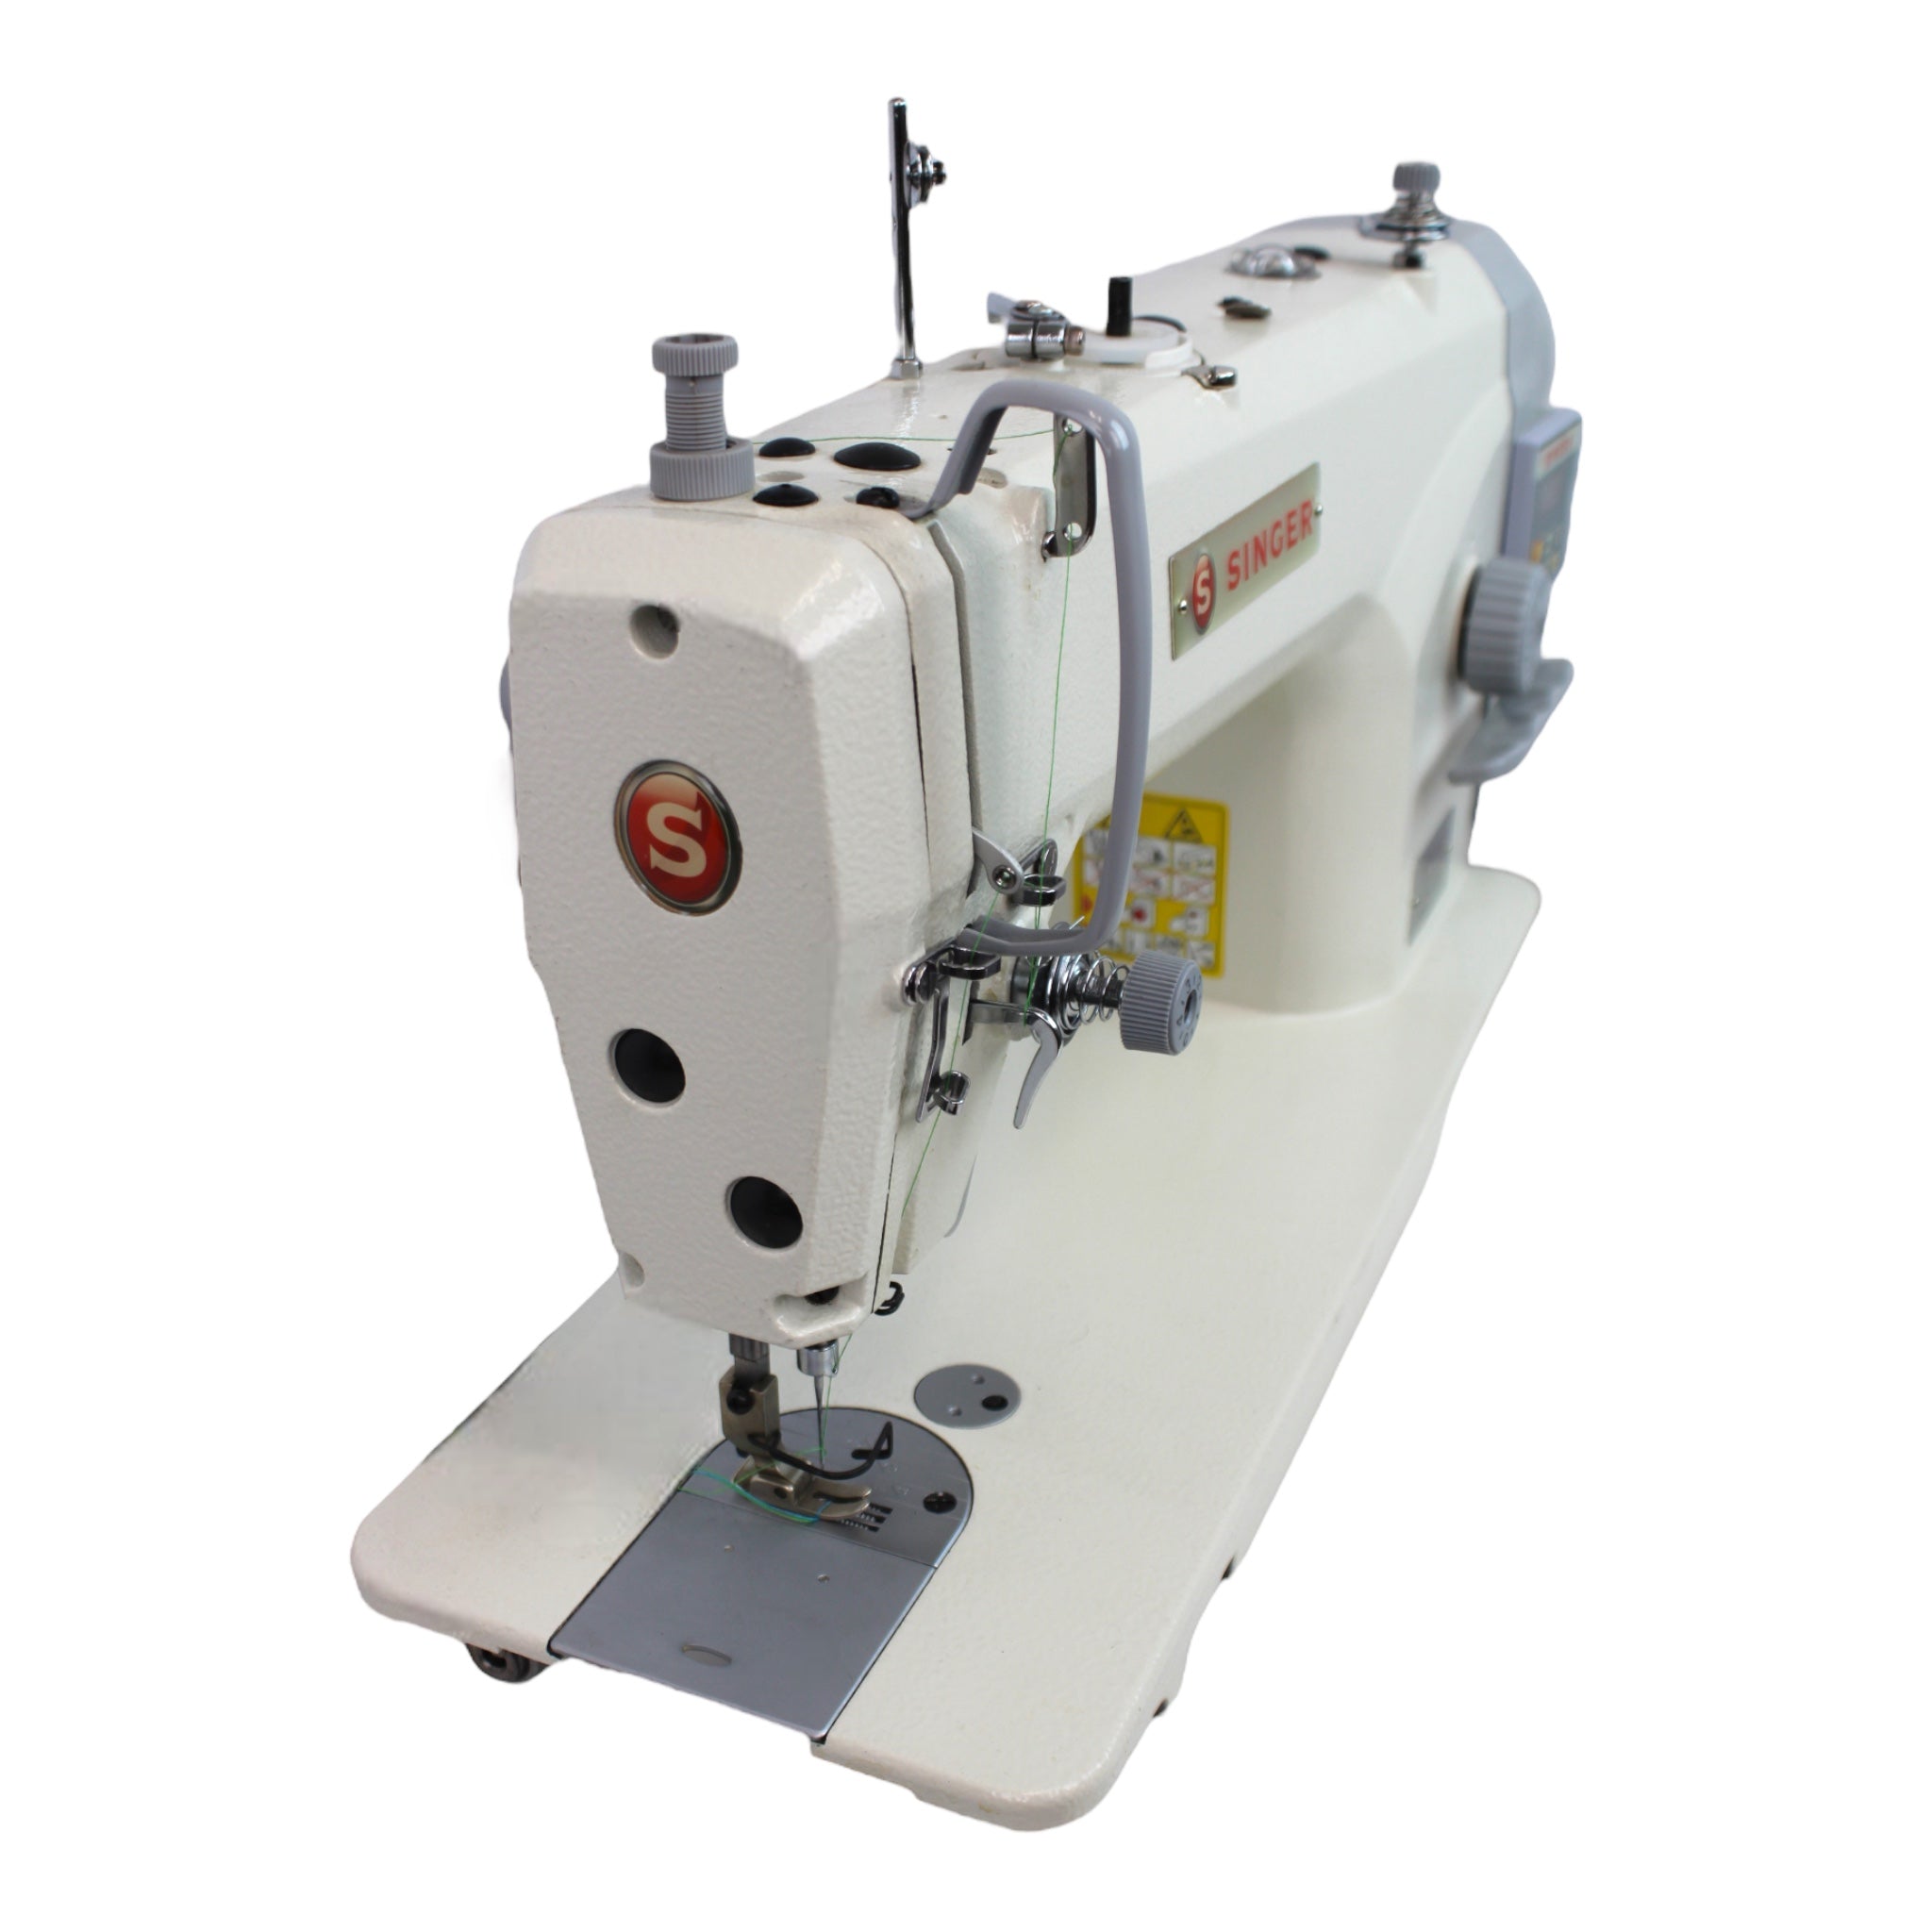 SINGER 141G-20 Single Needle Direct Drive Lockstitch Industrial Sewing Machine Assembled with Table and Stand Included